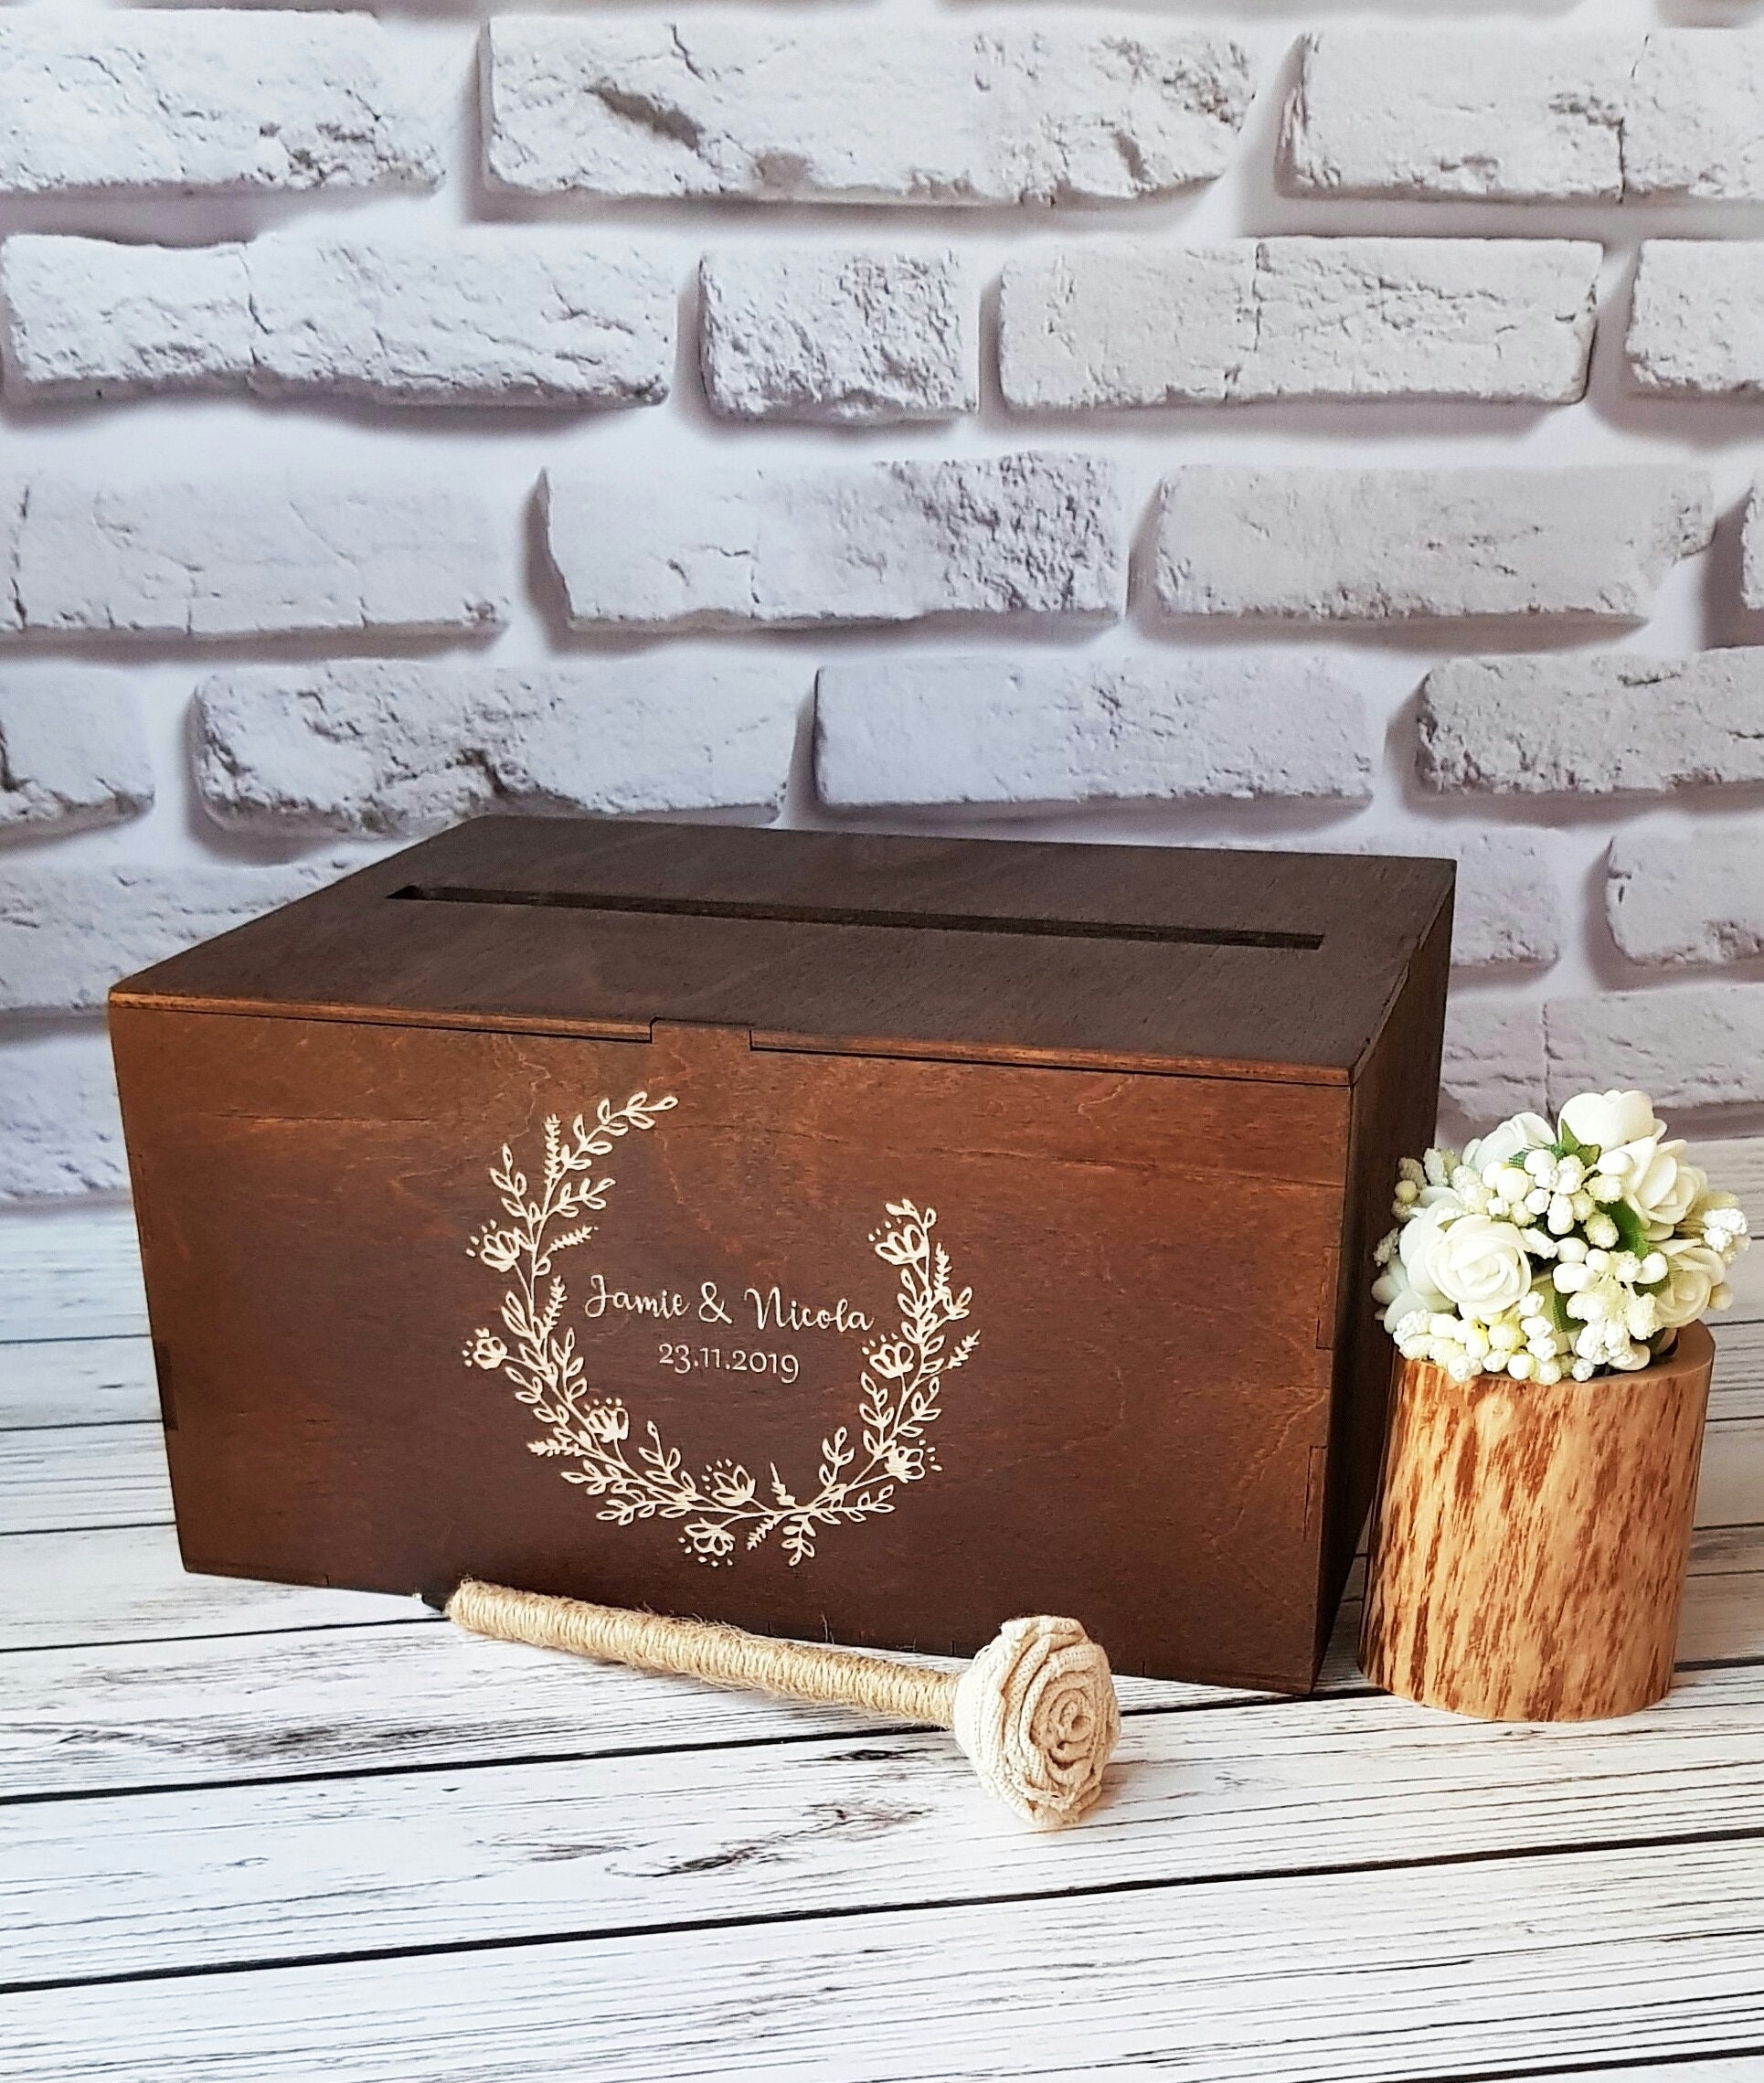 Great Lakes Memories GLM Wedding Card Box with Lock and Key, Card Box for Wedding, Rustic Wedding Decorations for Reception, Wedding Card Boxes for